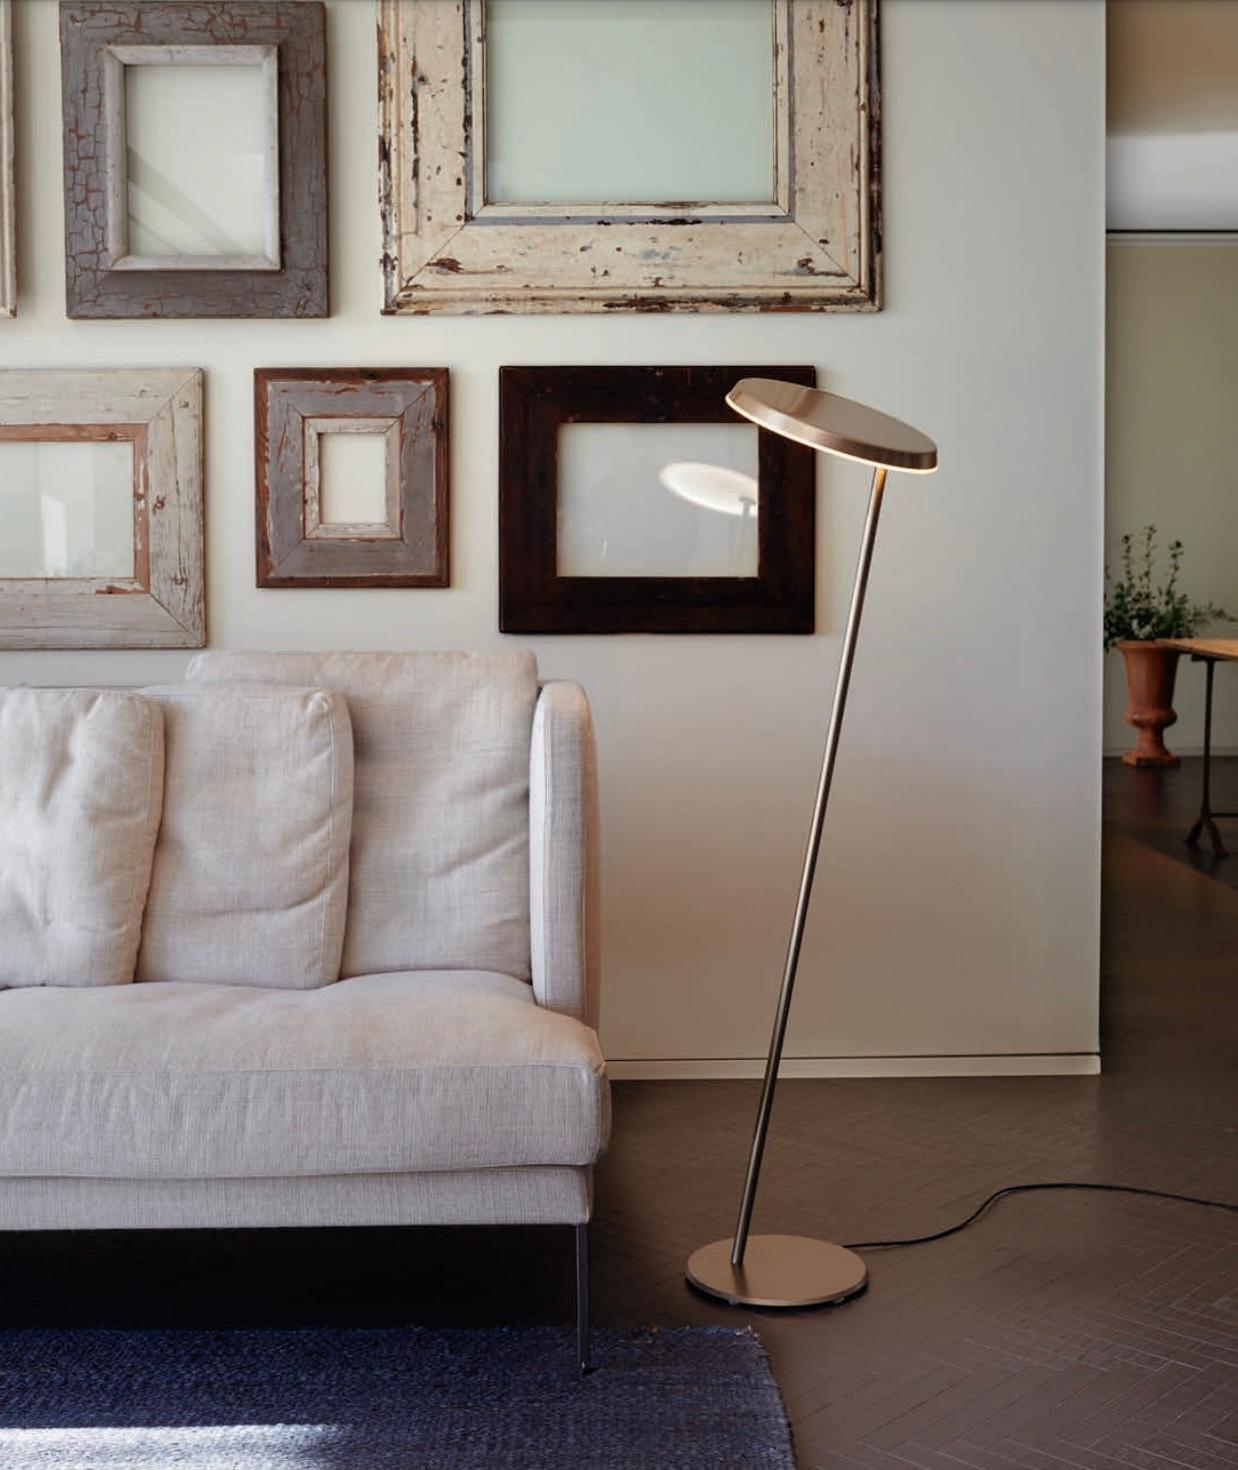 'Amanita' floor lamp by Mariana Pellegrino Soto for Oluce. 

Simple yet refined, this geometric floor lamp is crafted by Oluce in Italy using only the highest quality materials and scrupulous attention to detail. Executed in anodic bronze painted